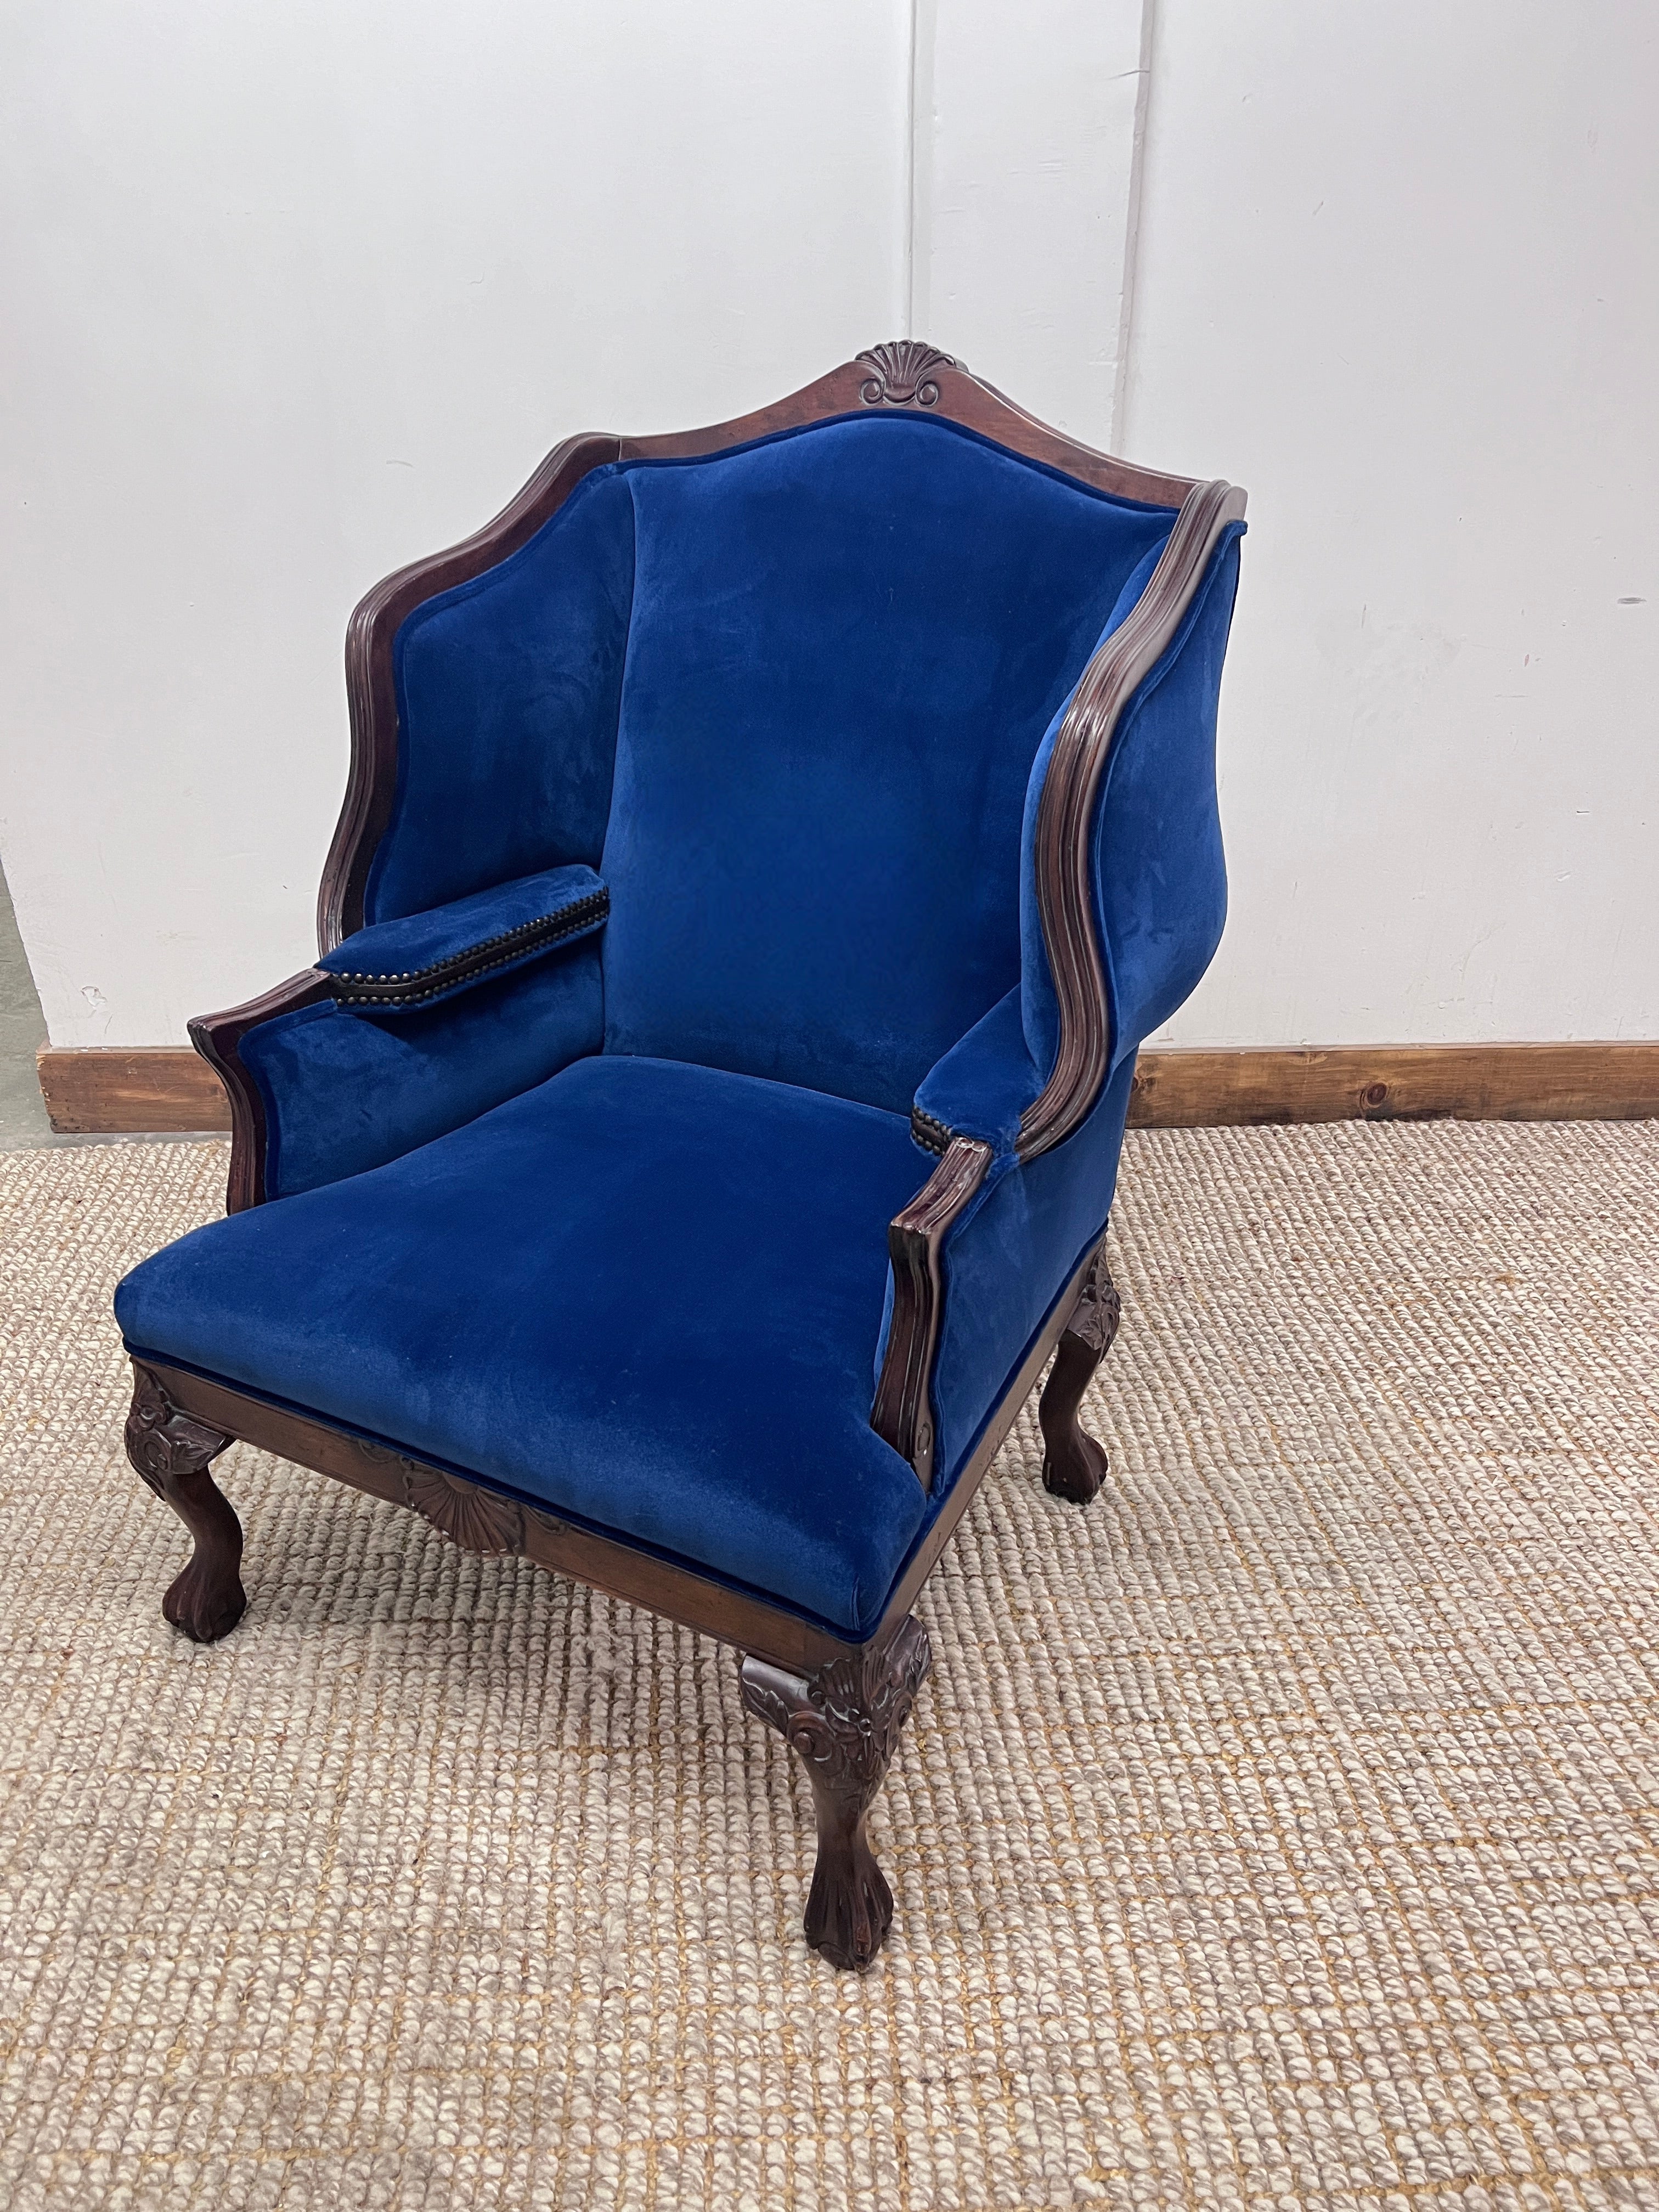 An exceptional Wingback Chair with large curved wings and arm rests inside the framework trimmed in Bronze nail heads.  The chair is in the French Baroque Regence Style, although it is an early 20th Century chair.

The vivid Blue Mohair is a